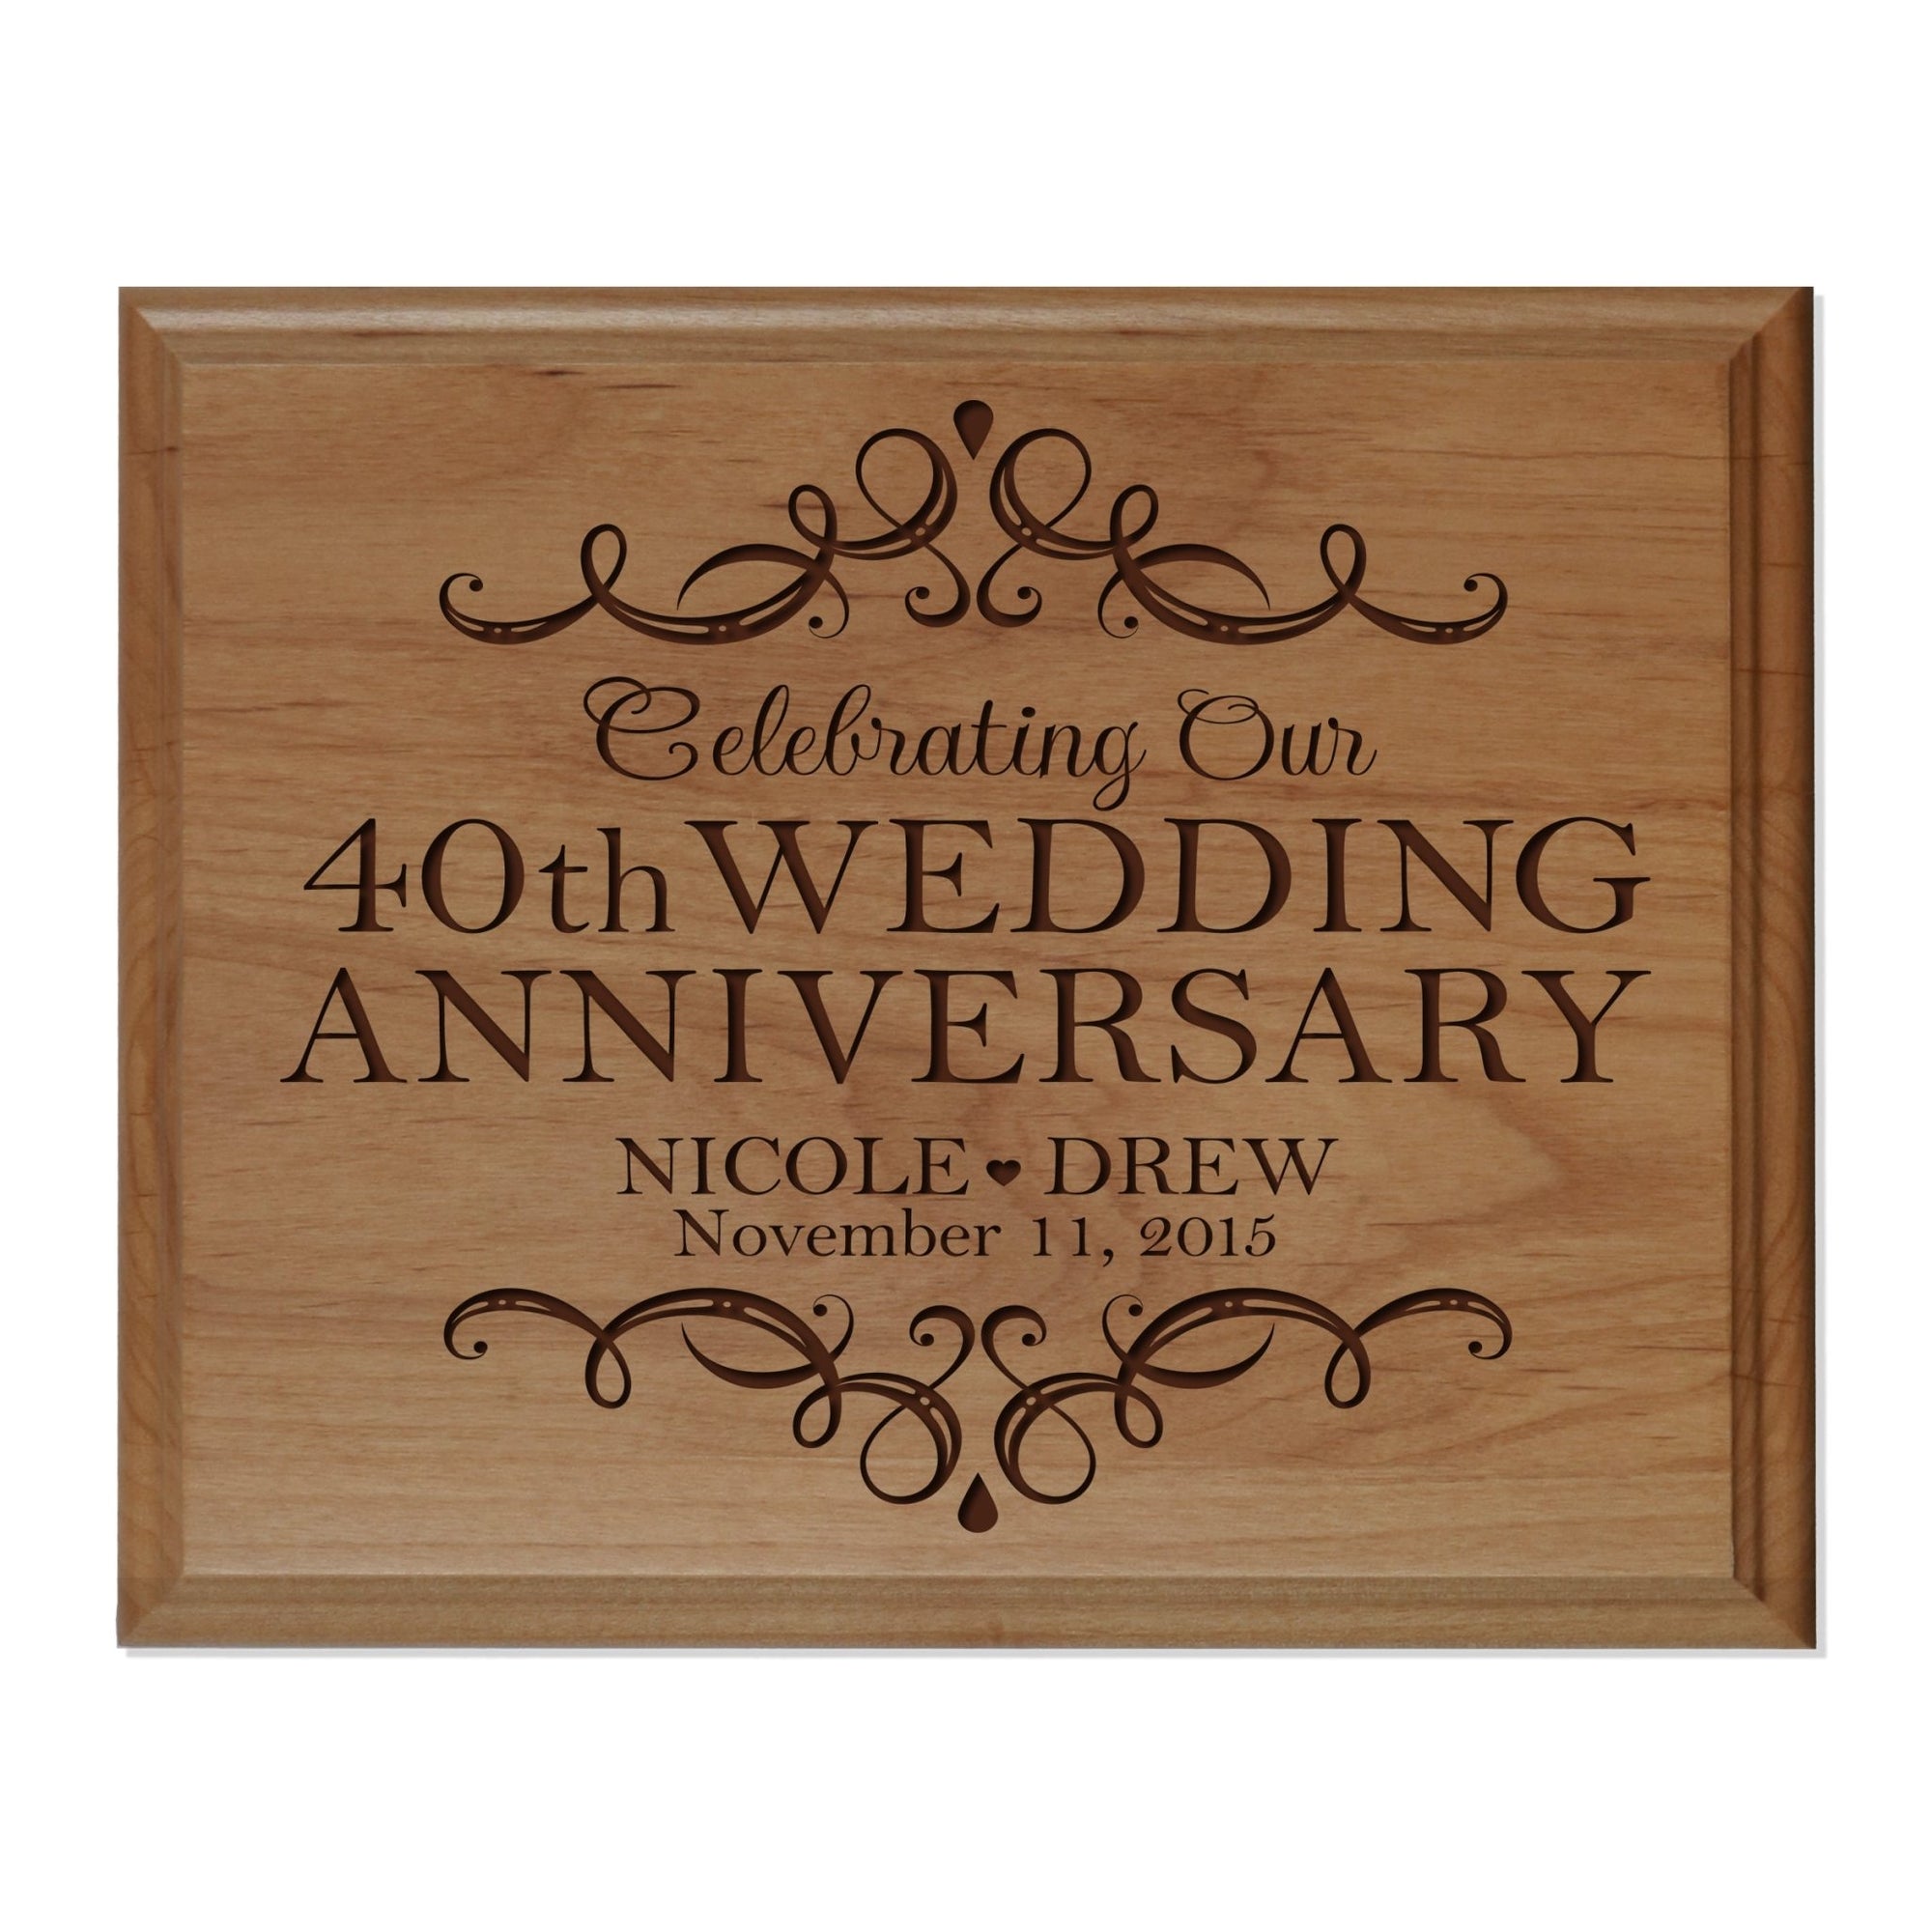 Personalized Anniversary Plaque - Celebrating Our Wedding Anniversary - LifeSong Milestones